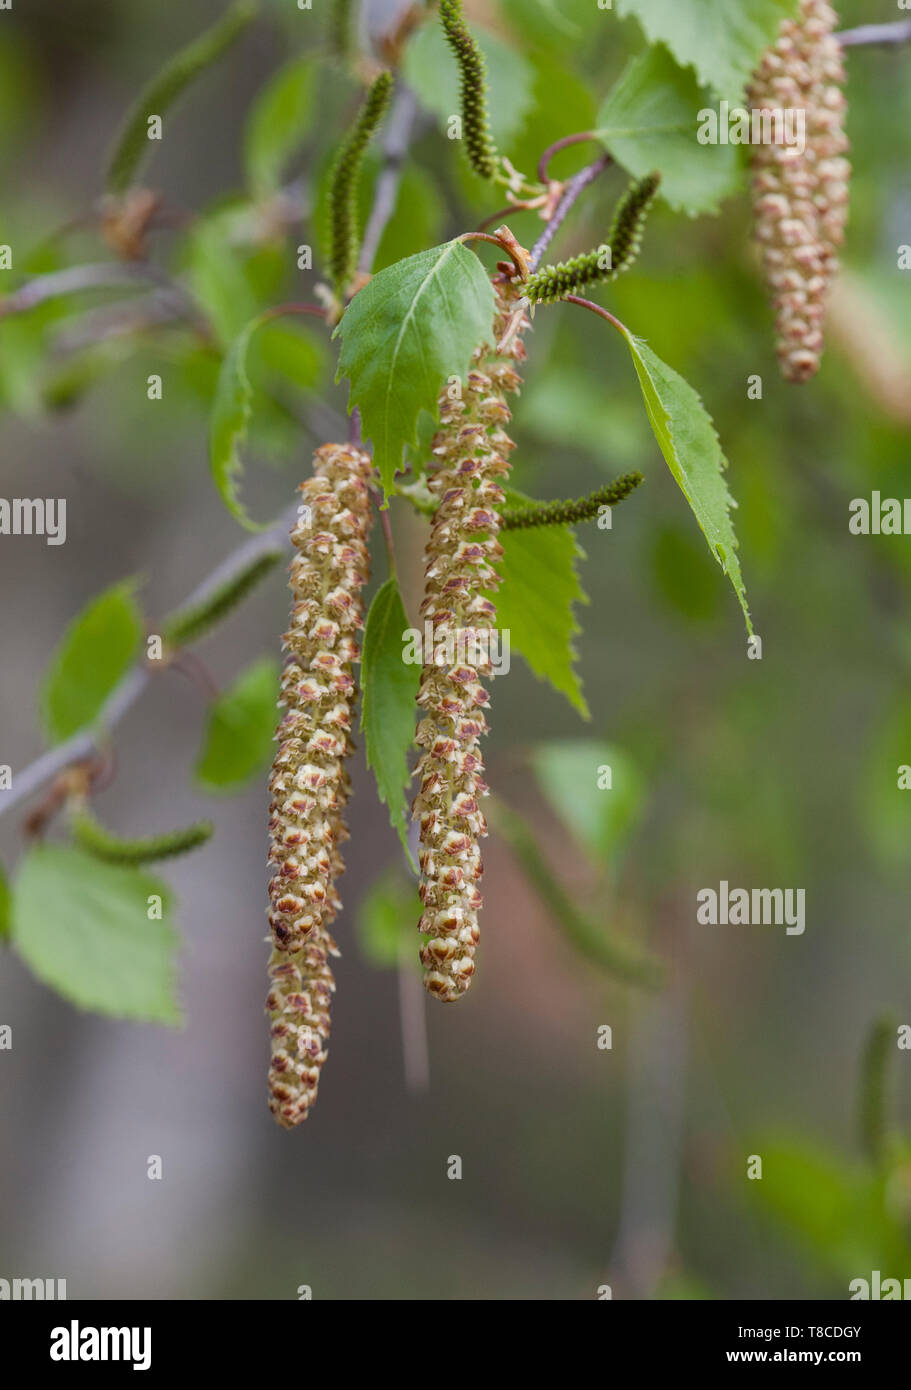 BIRCHTREE CATKINS at spring Stock Photo